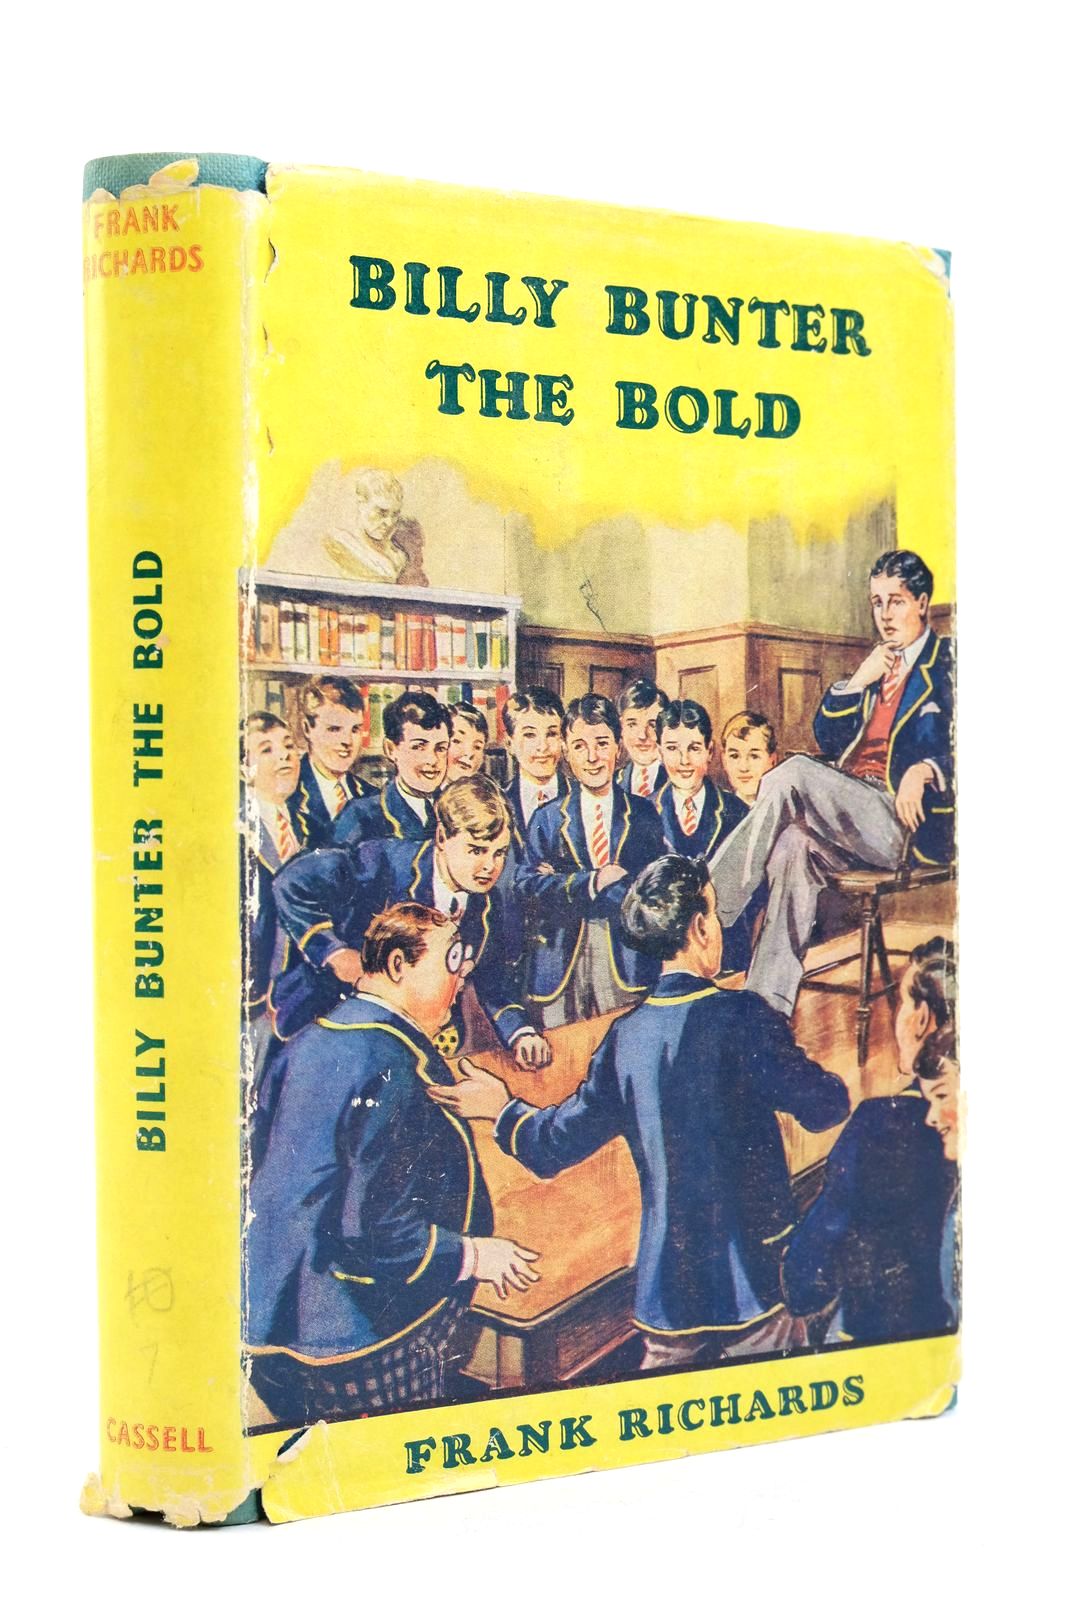 Photo of BILLY BUNTER THE BOLD written by Richards, Frank illustrated by Macdonald, R.J. published by Cassell &amp; Co. Ltd. (STOCK CODE: 2139419)  for sale by Stella & Rose's Books